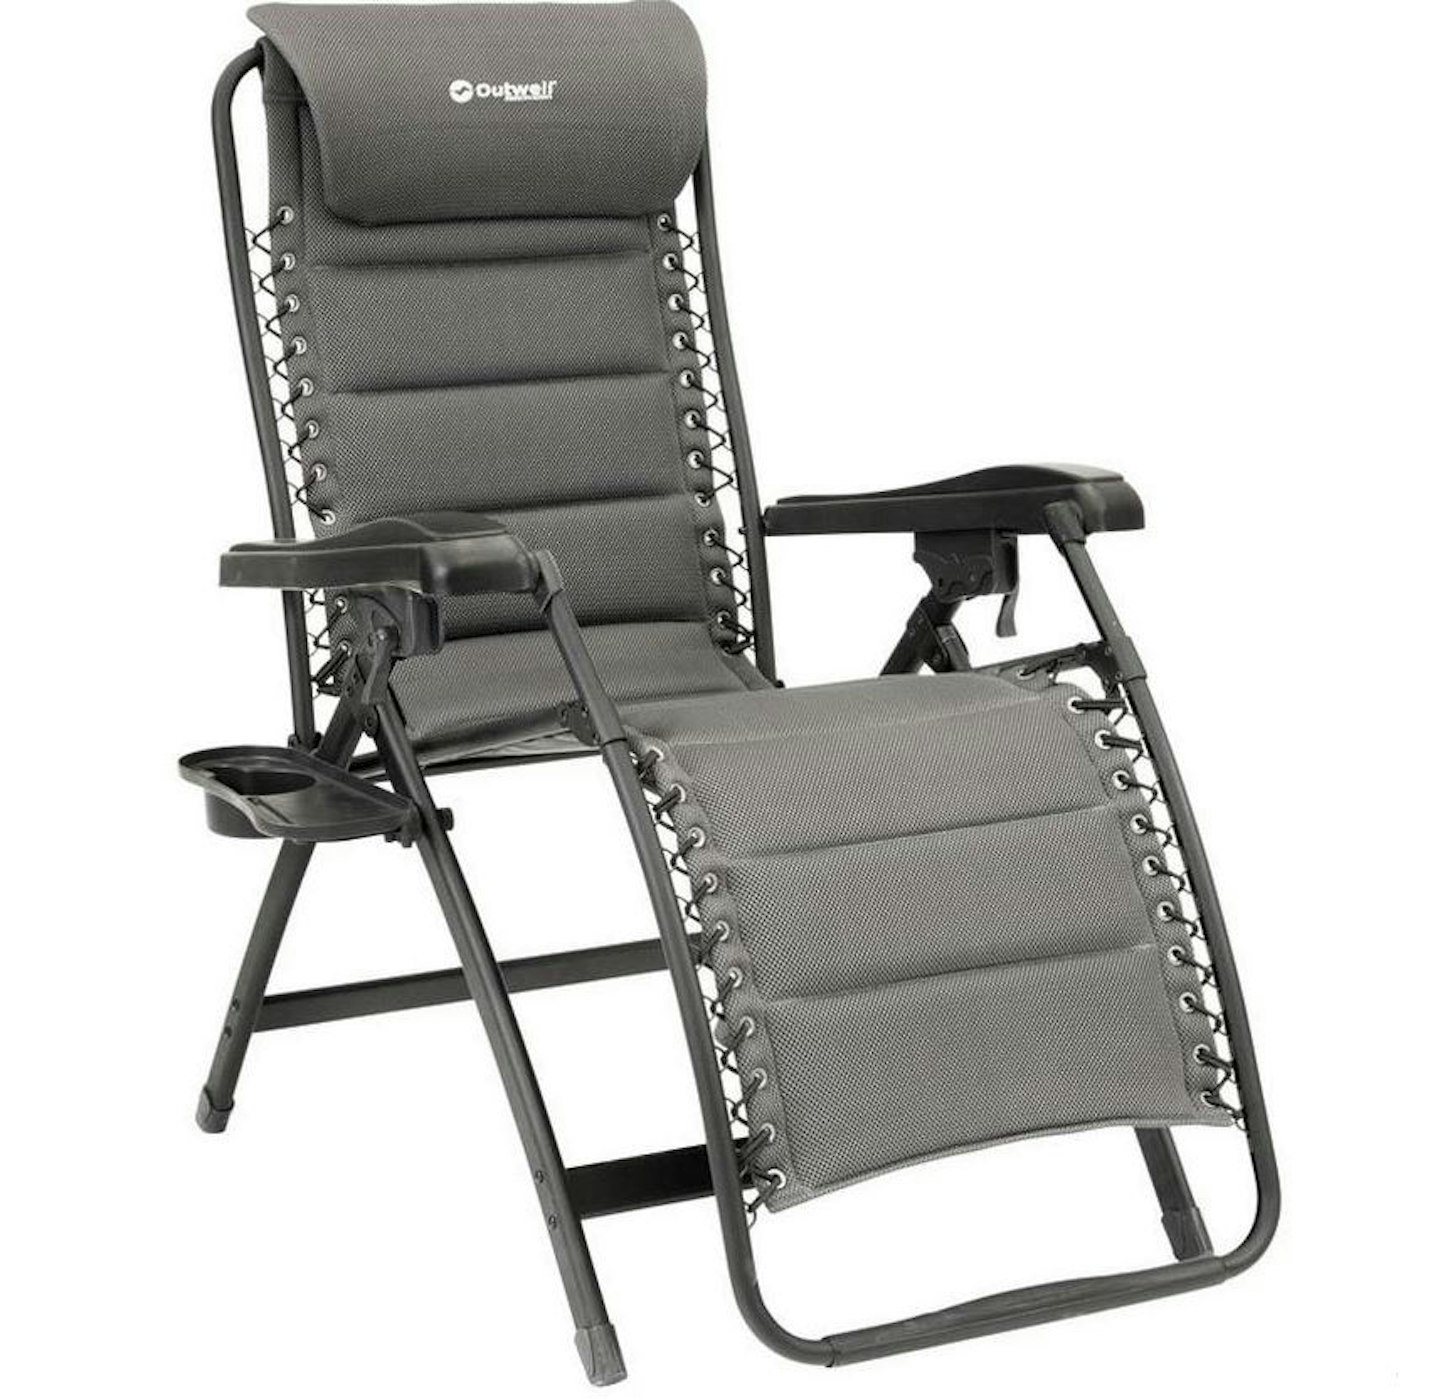 Outwell Acadia Signature Lounger